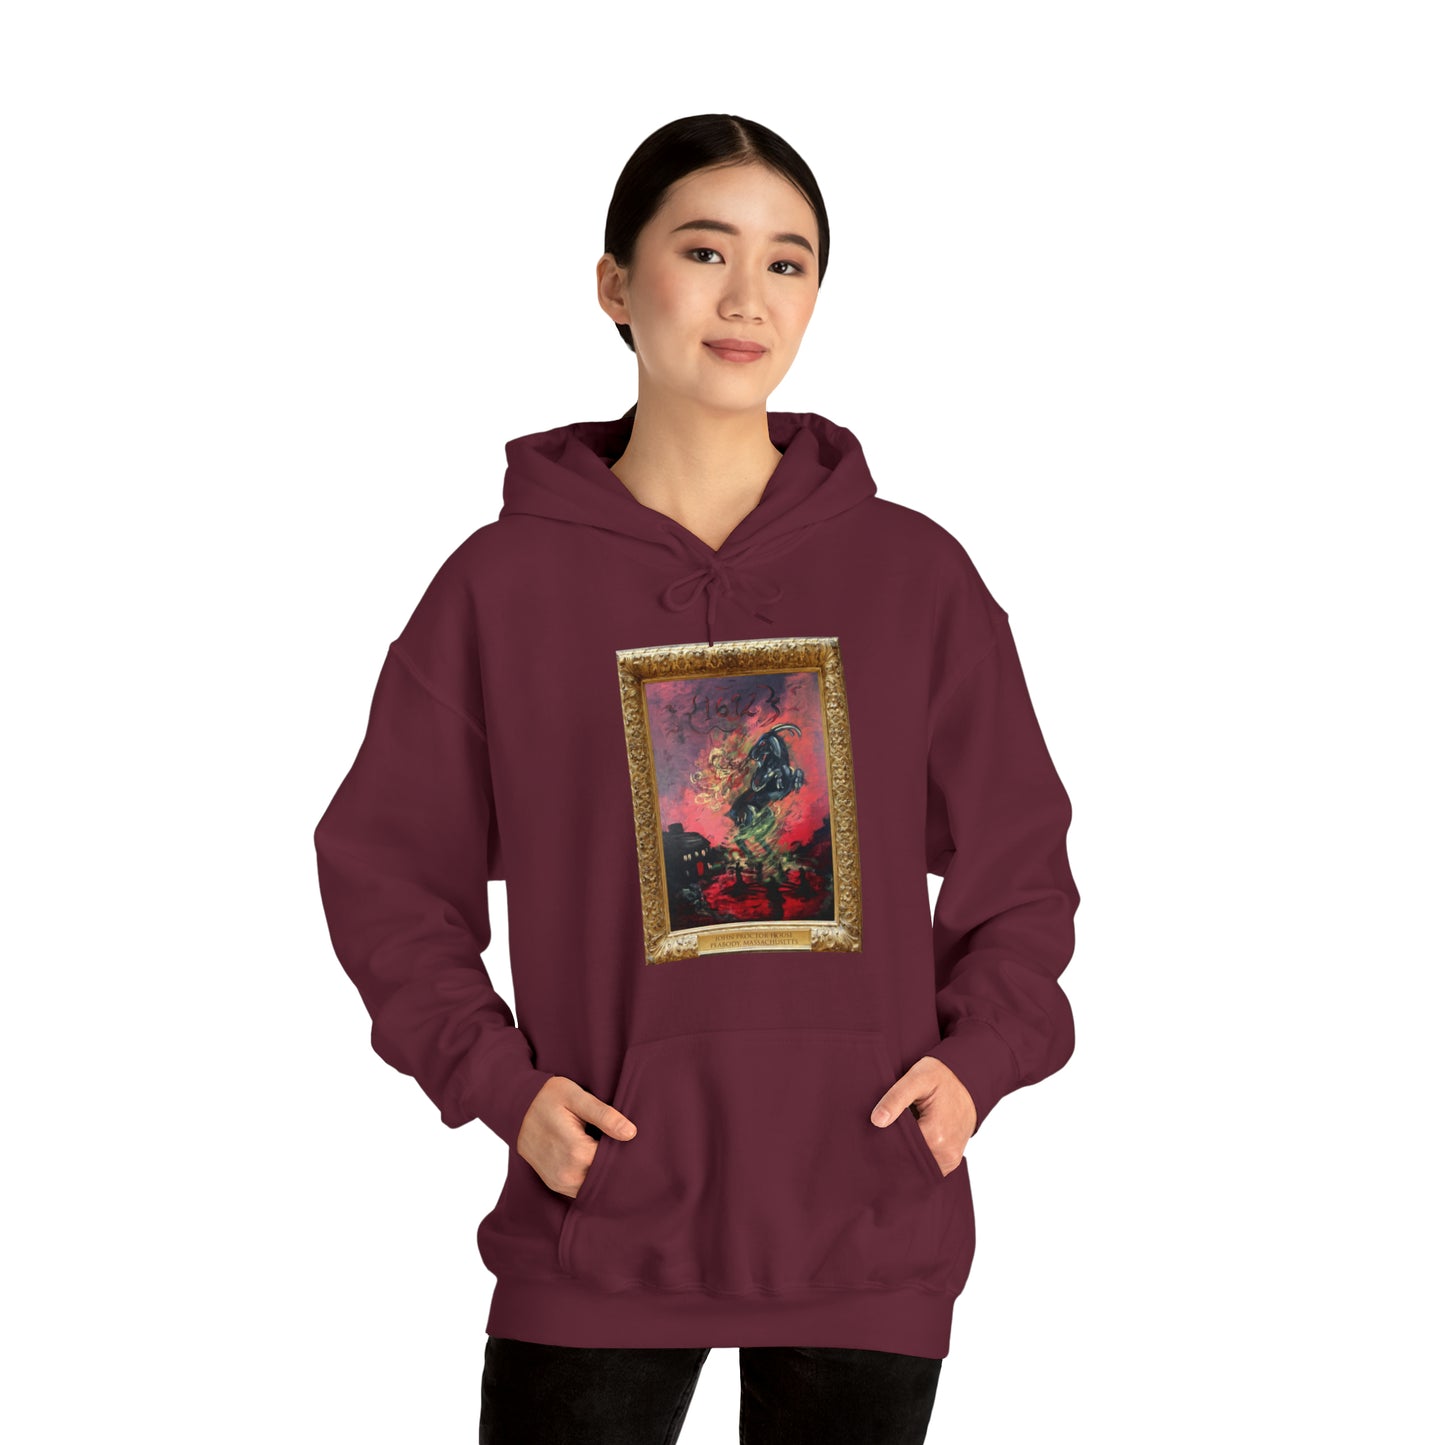 Scared & Alone Richard-Lael's "Proctor House" Unisex Gallery Hoodie